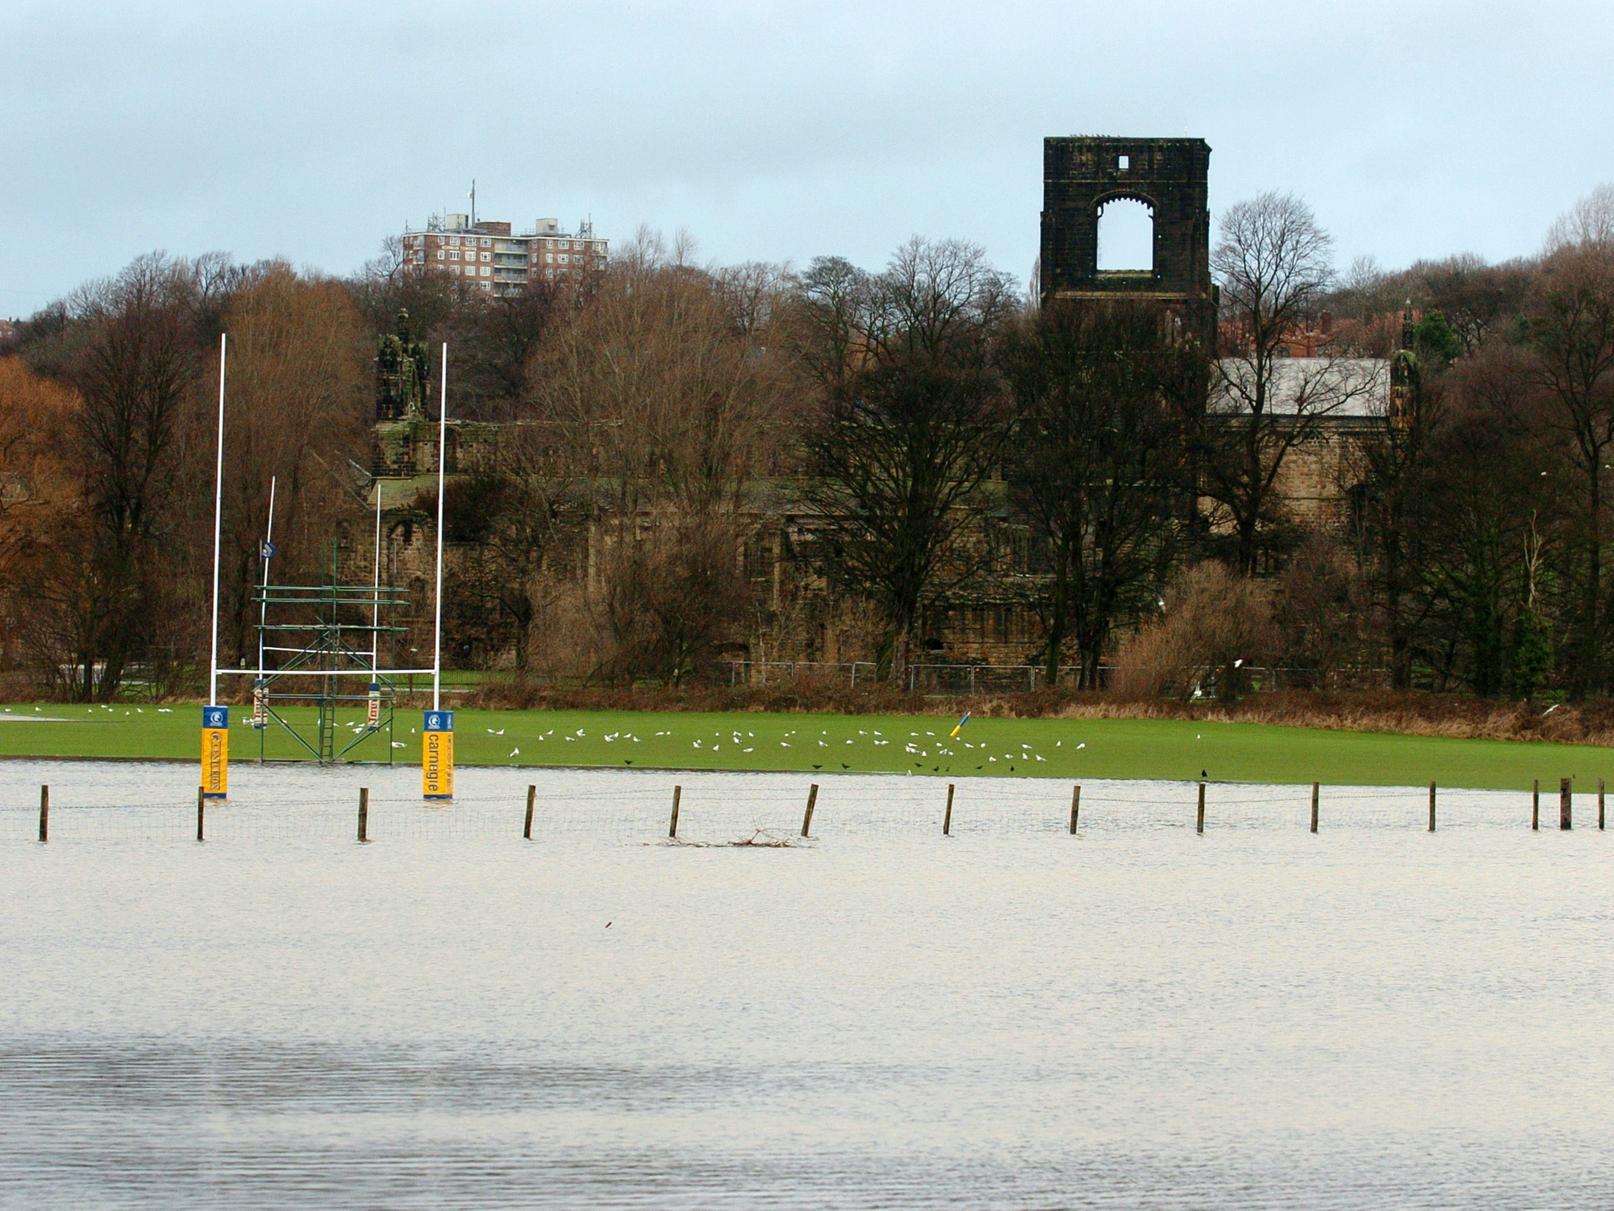 Rugby pitches flooded in the shadow of Kirkstall Abbey.